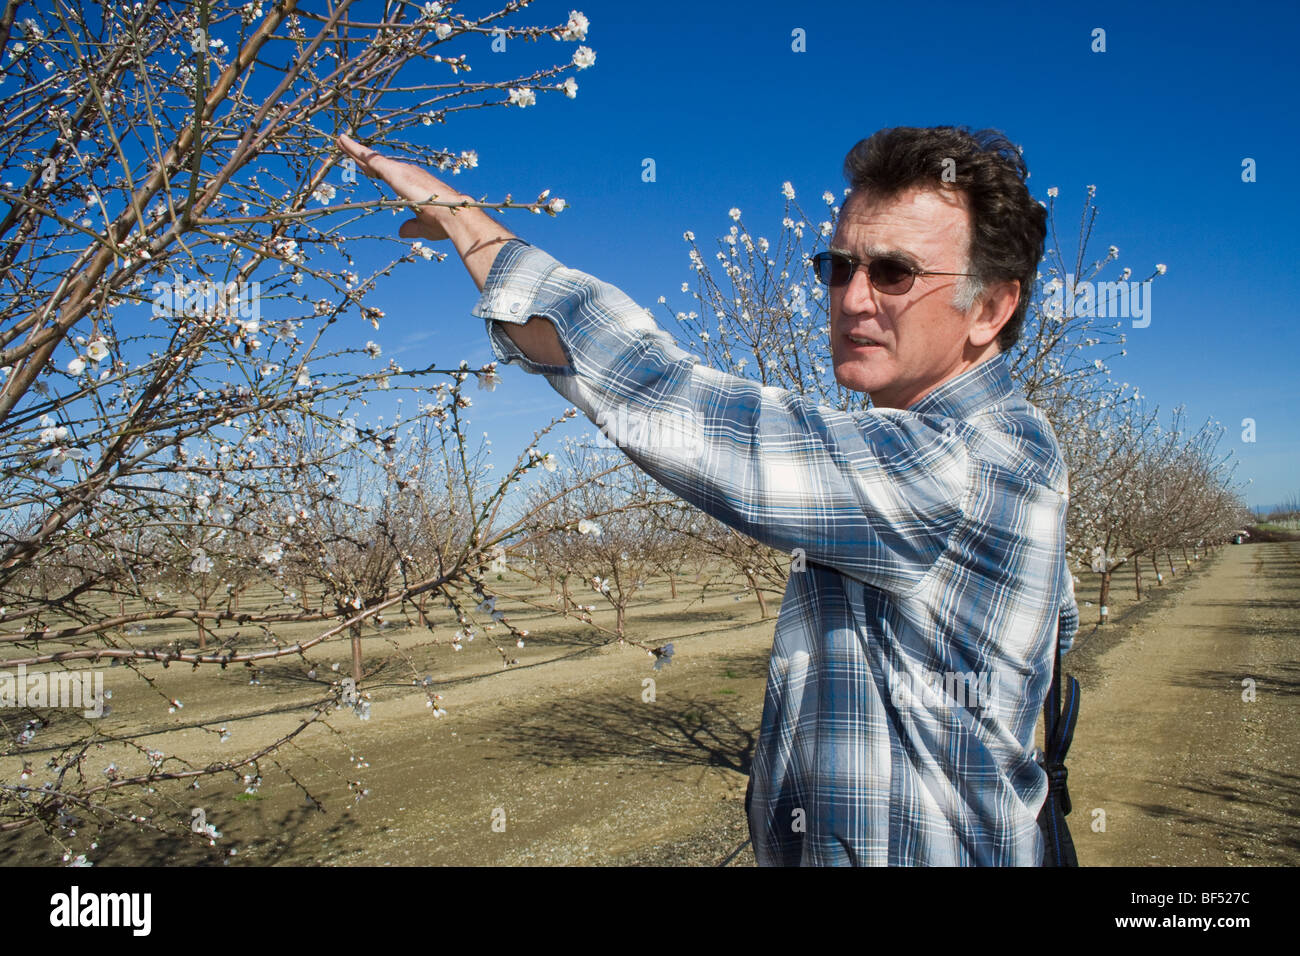 A farm advisor showing blooming almond trees in a research project studying minimal pruning / Glenn County, California, USA. Stock Photo